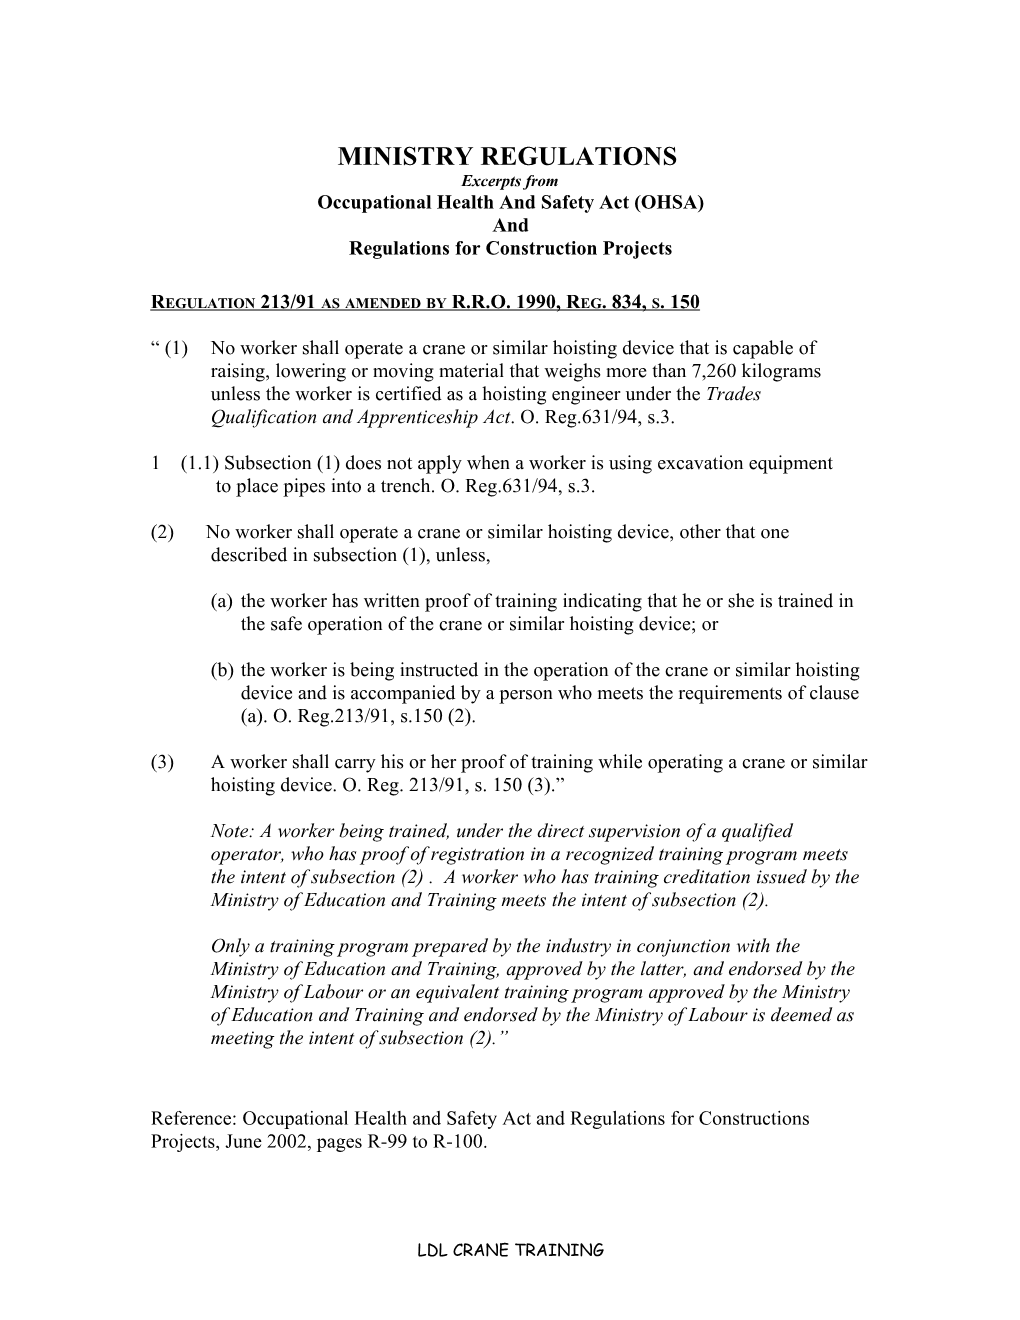 Regulations for Construction, Continued